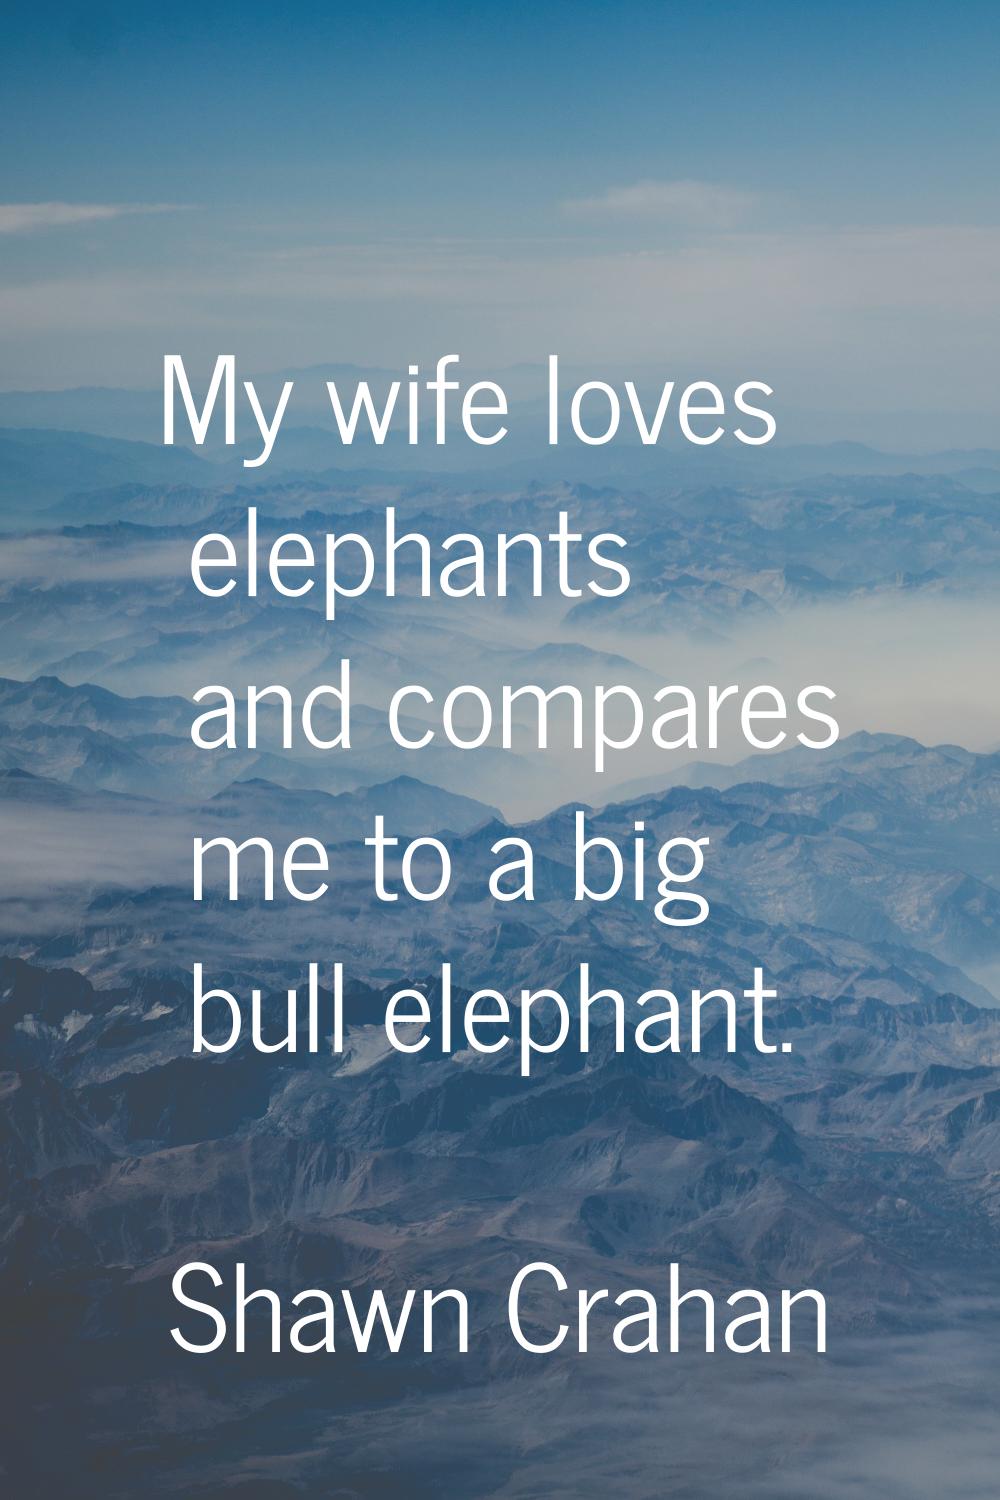 My wife loves elephants and compares me to a big bull elephant.